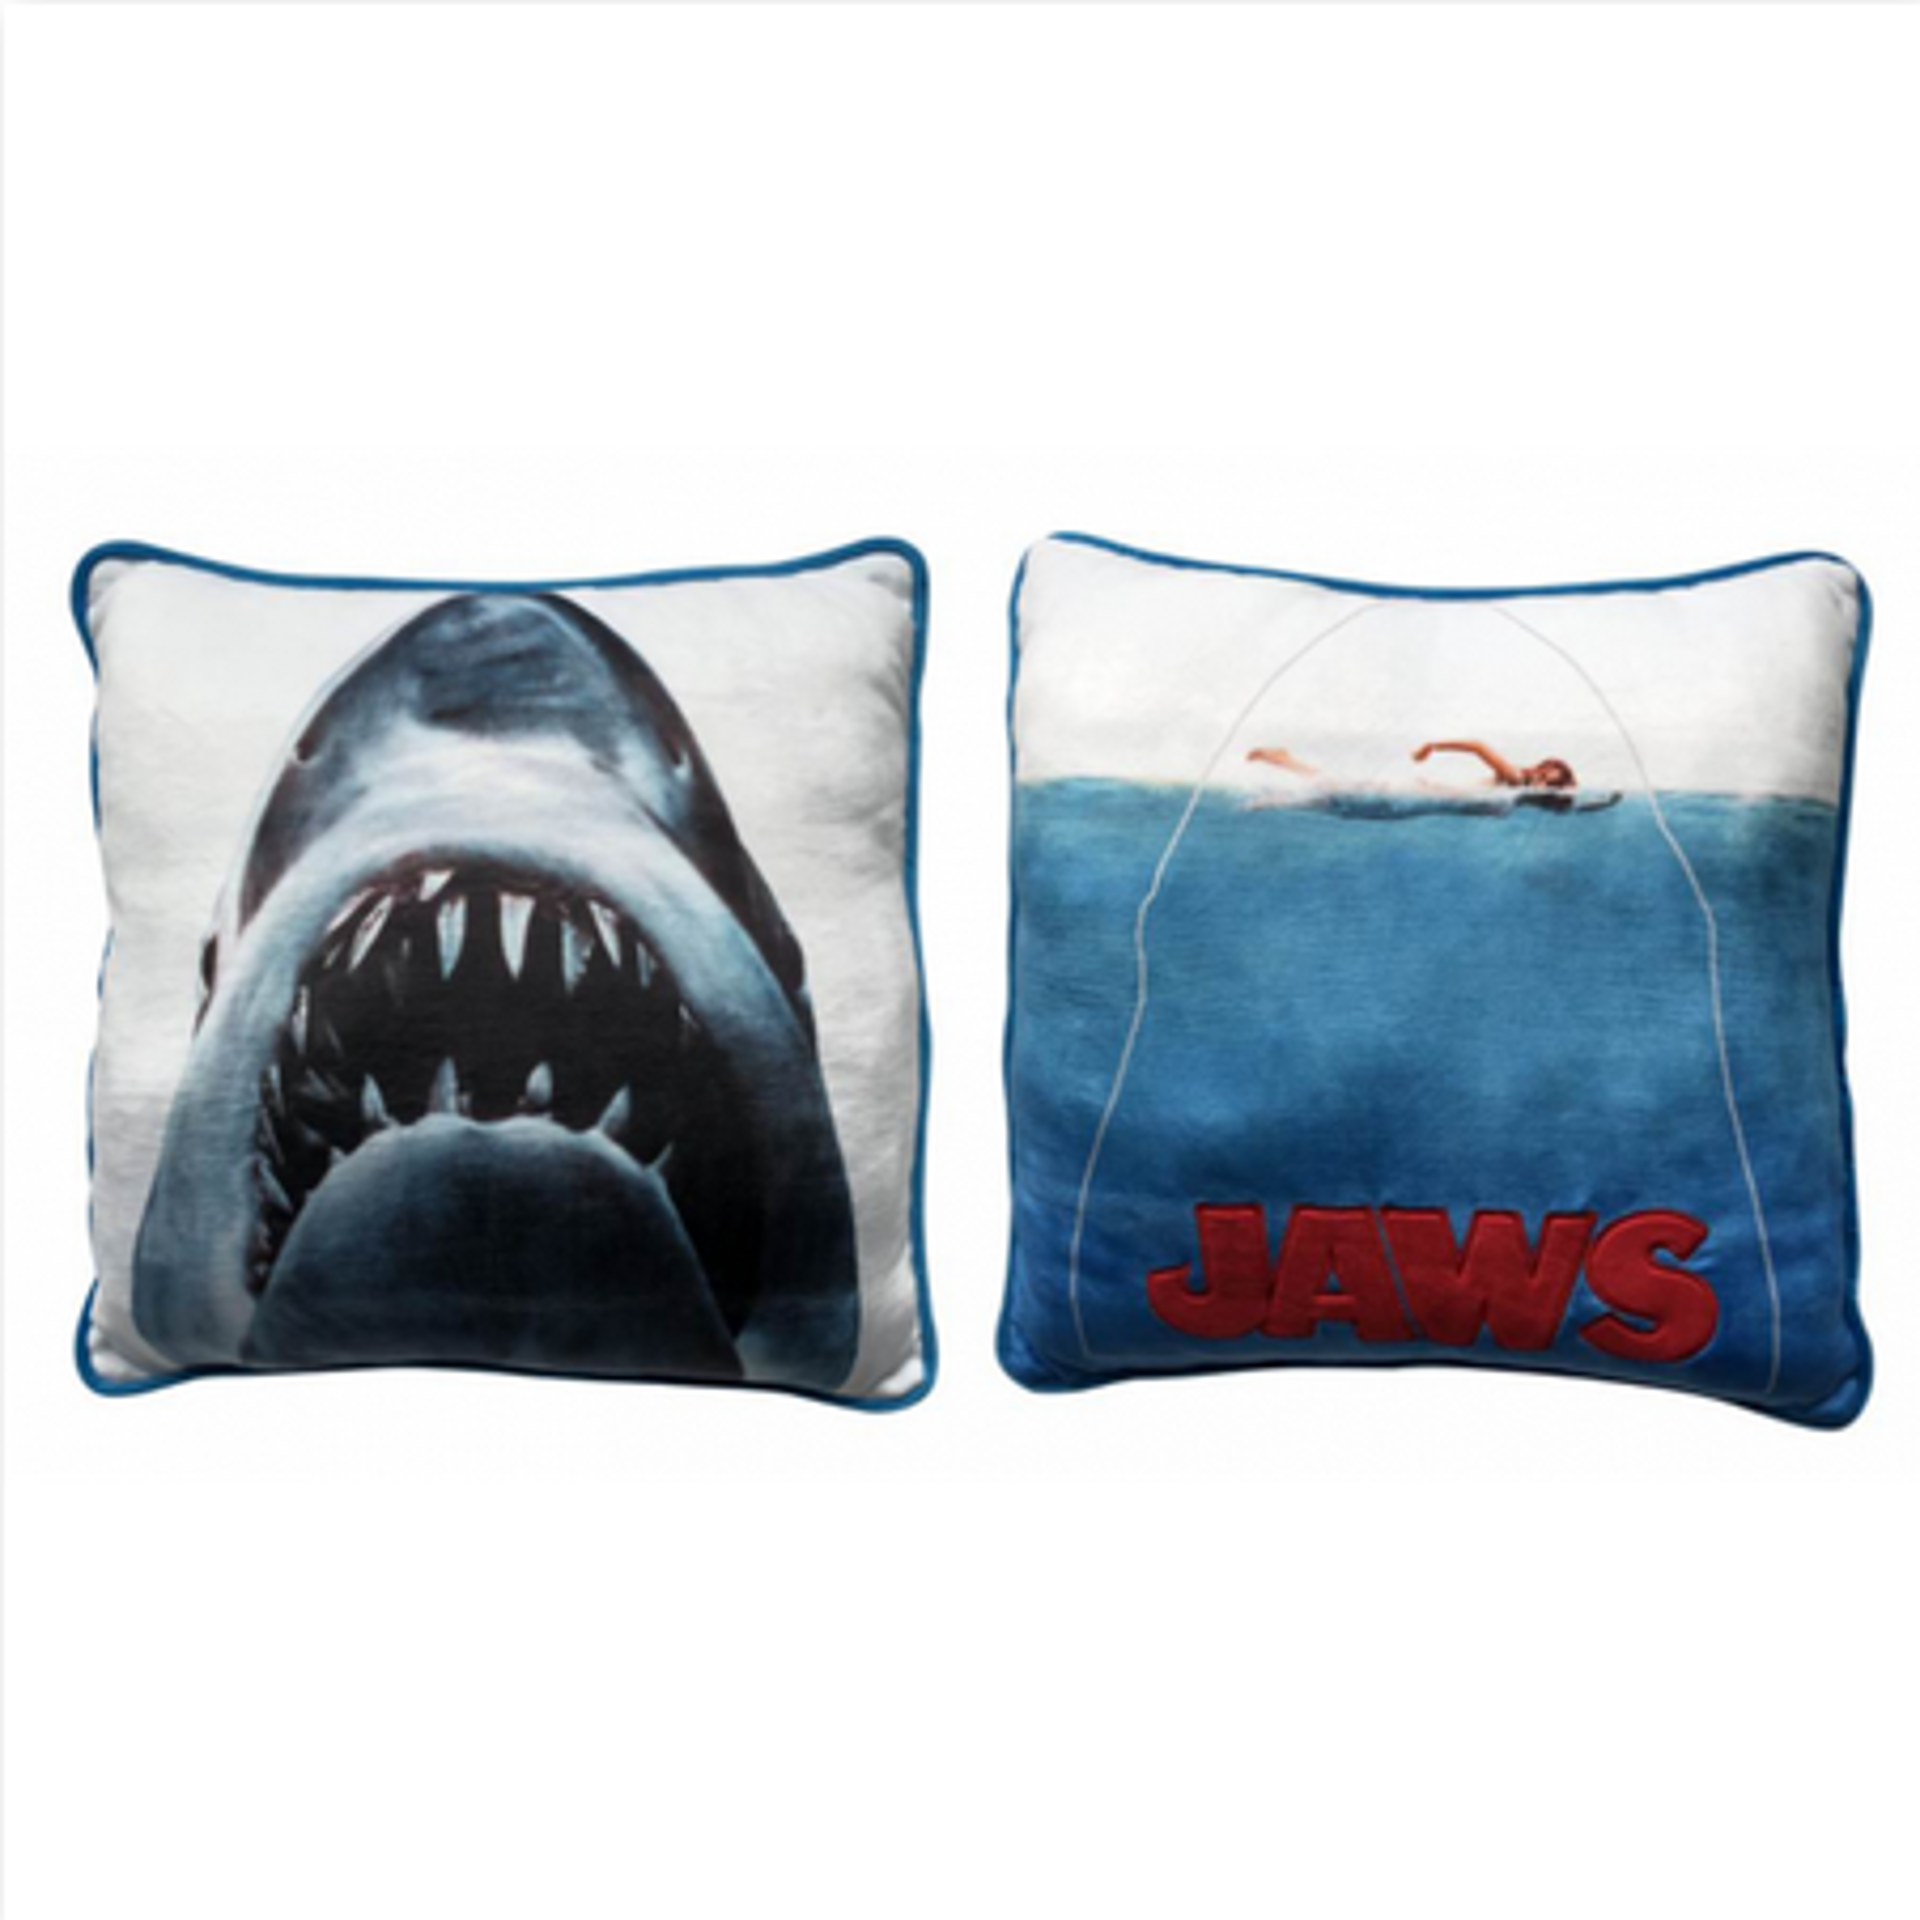 Jaws - Coussin Jaws 60 cm